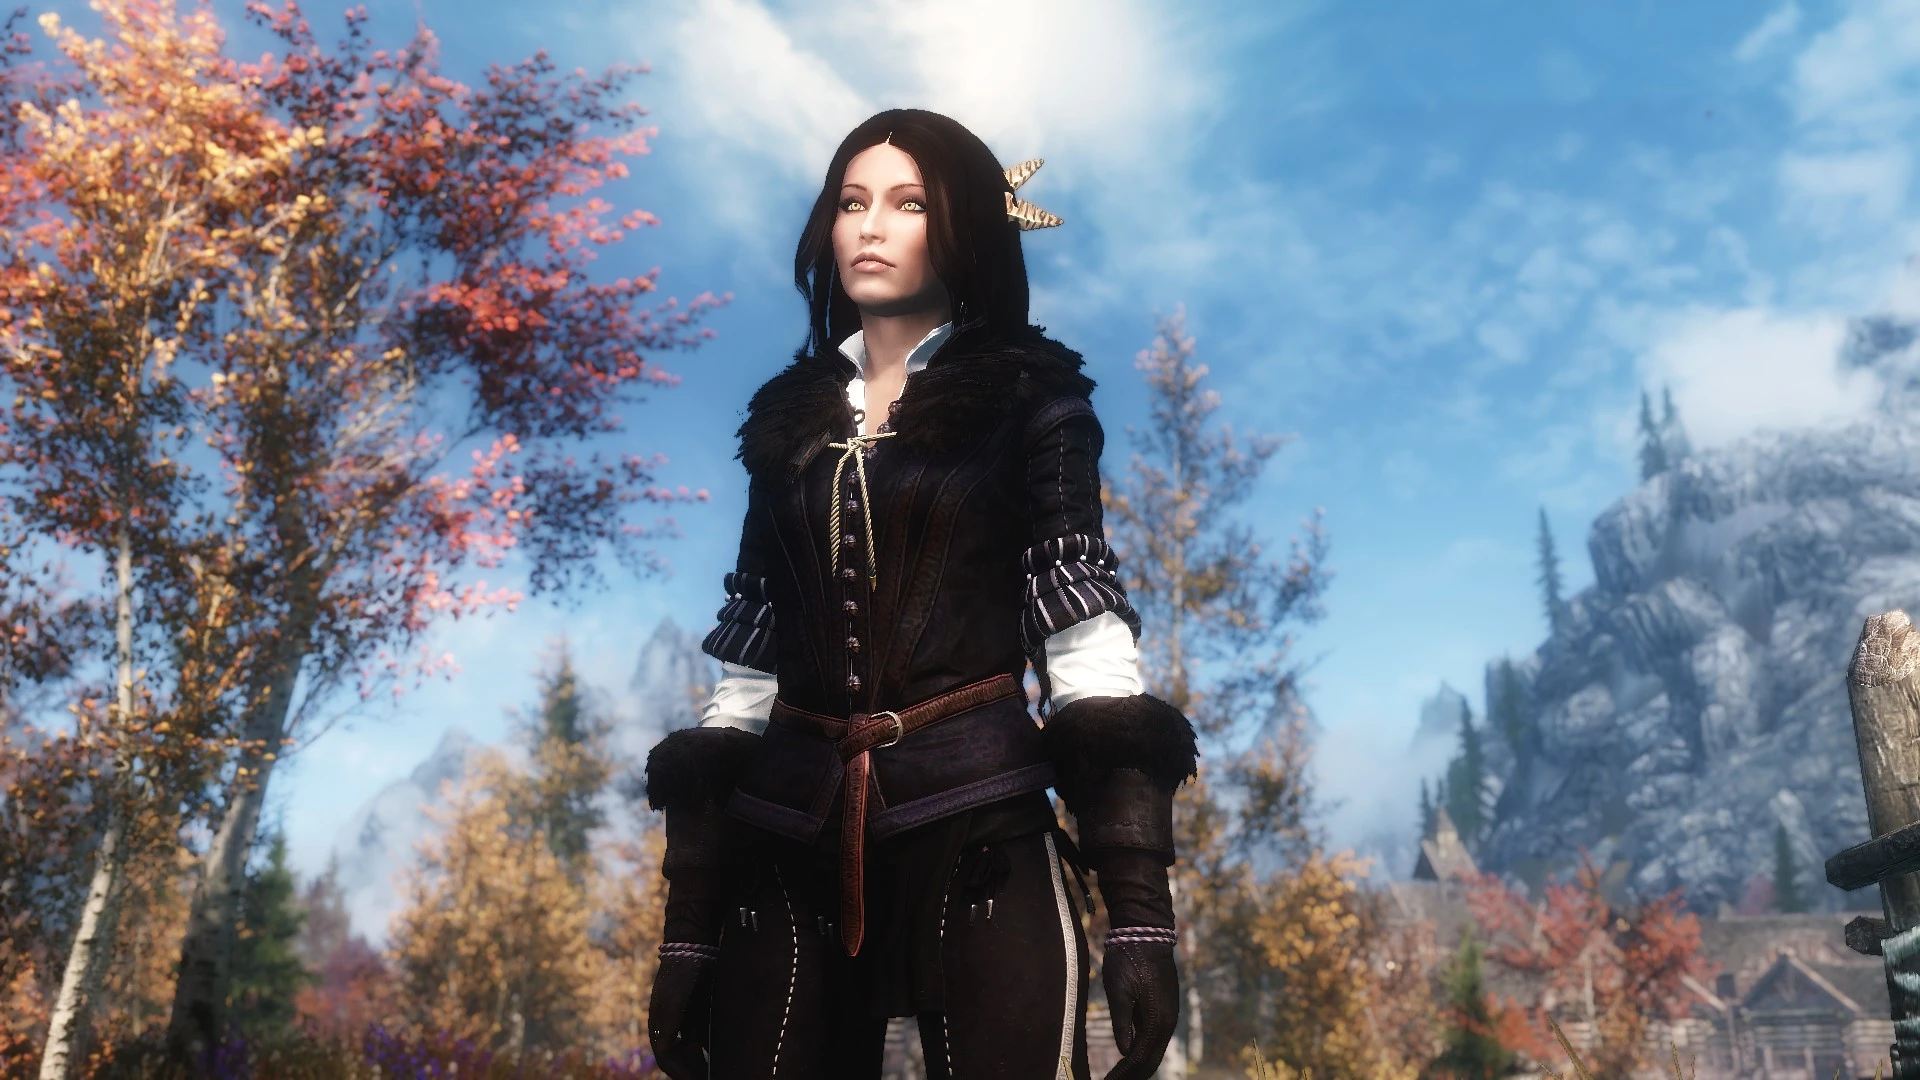 Yennefer of vengerberg the witcher 3 voiced standalone follower se фото 11